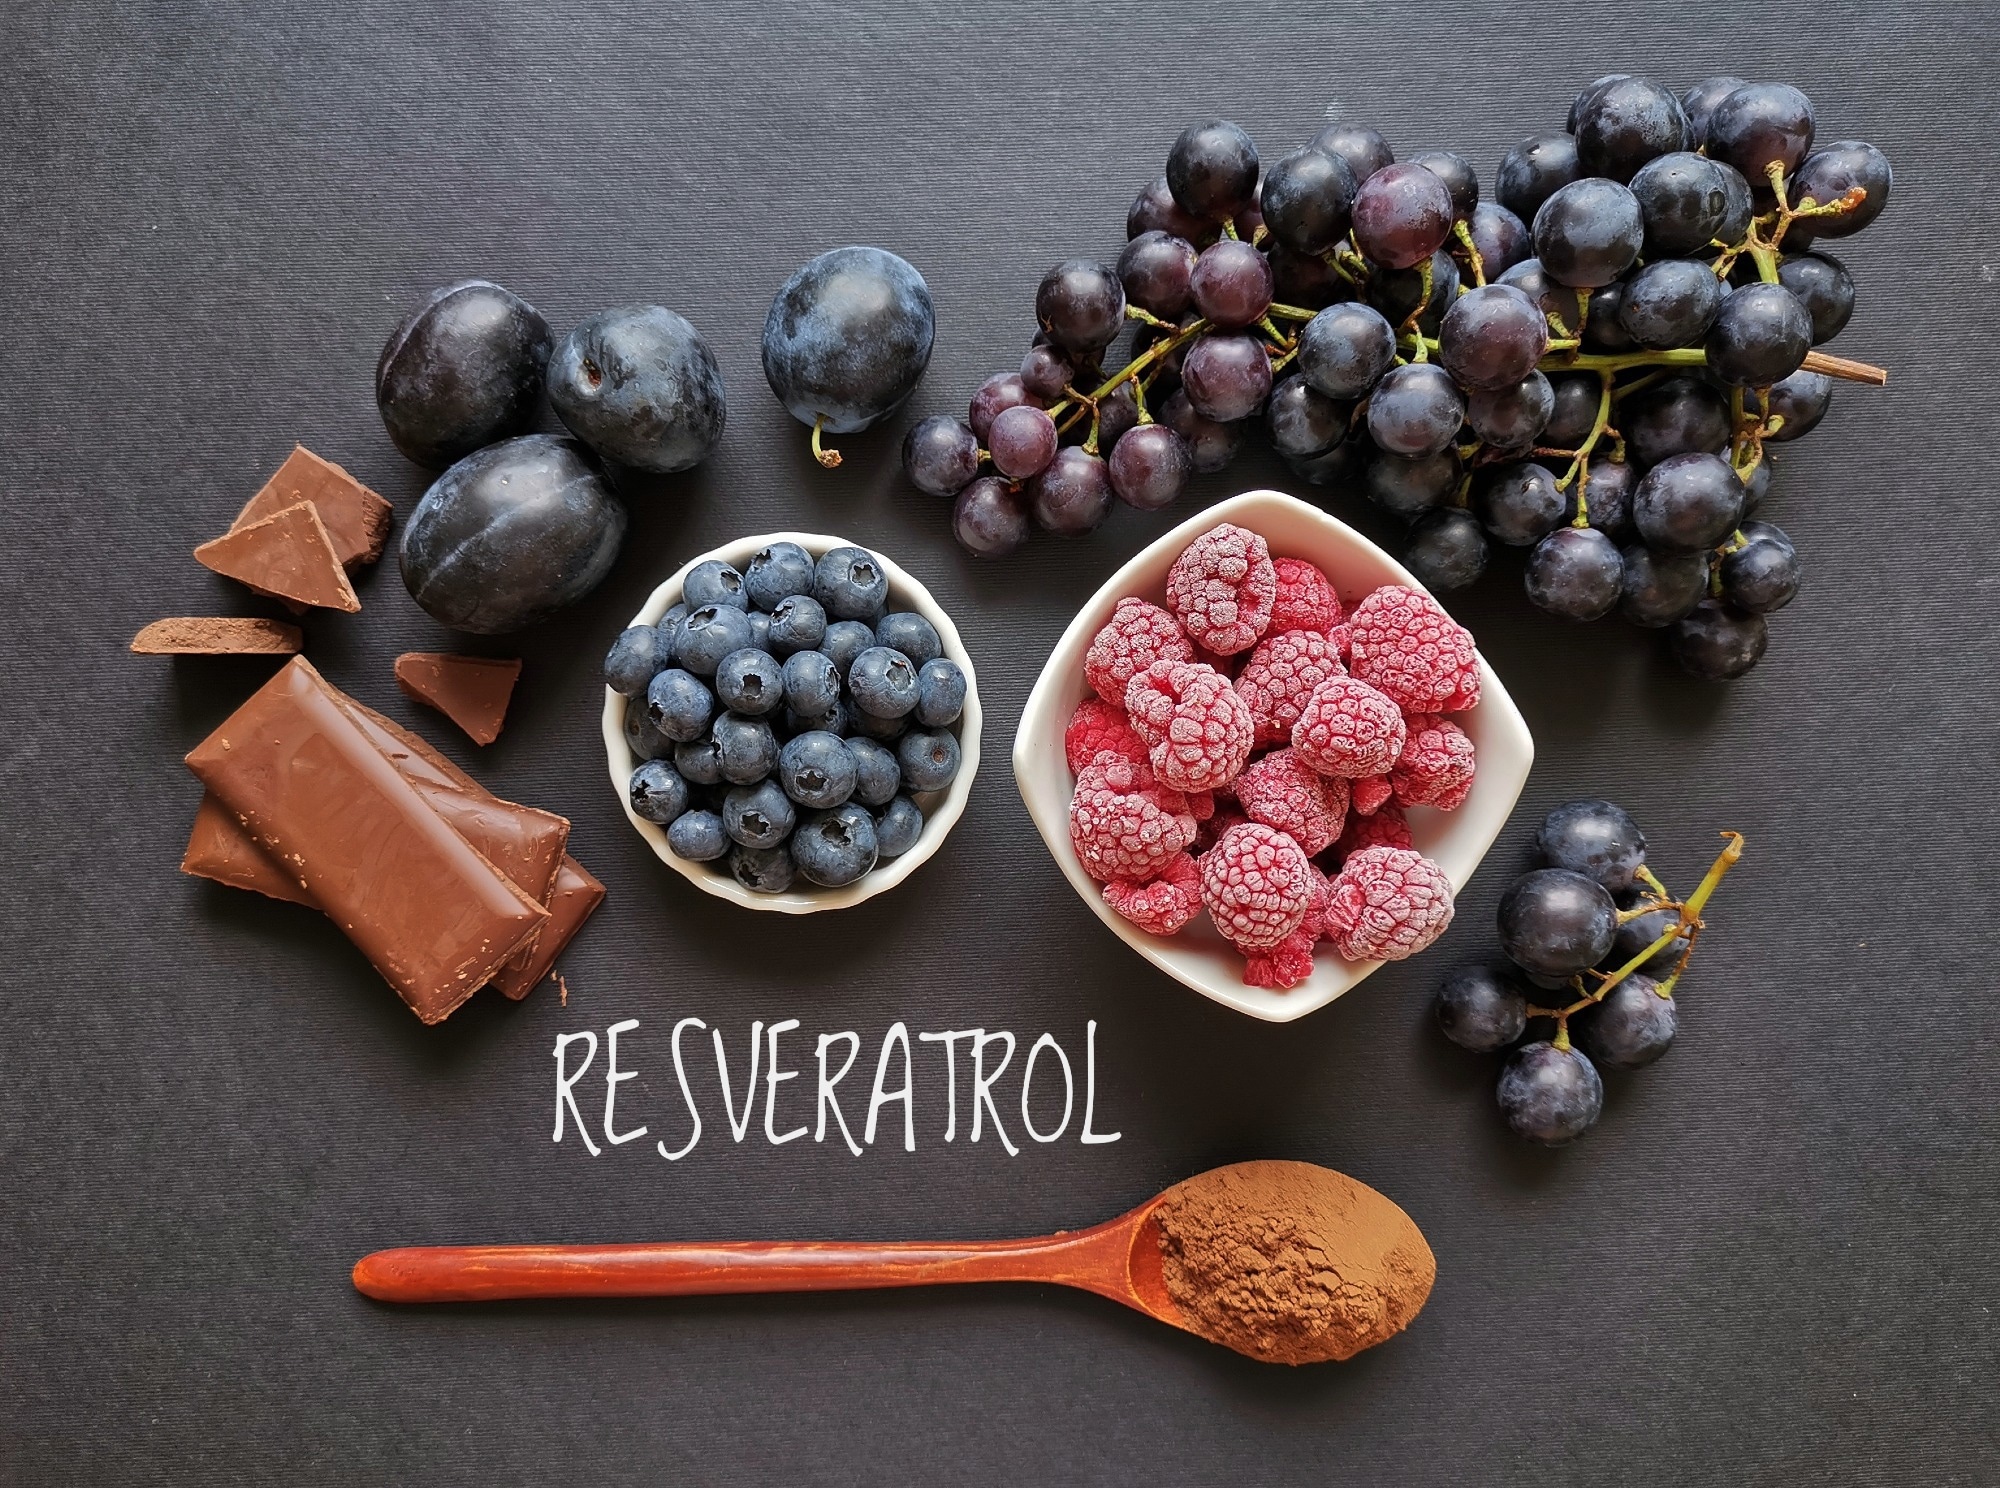 Study: The Impact of Resveratrol-Enriched Bread on Cardiac Remodeling in a Preclinical Model of Diabetes. Image Credit: DanijelaMaksimovic/Shutterstock.com